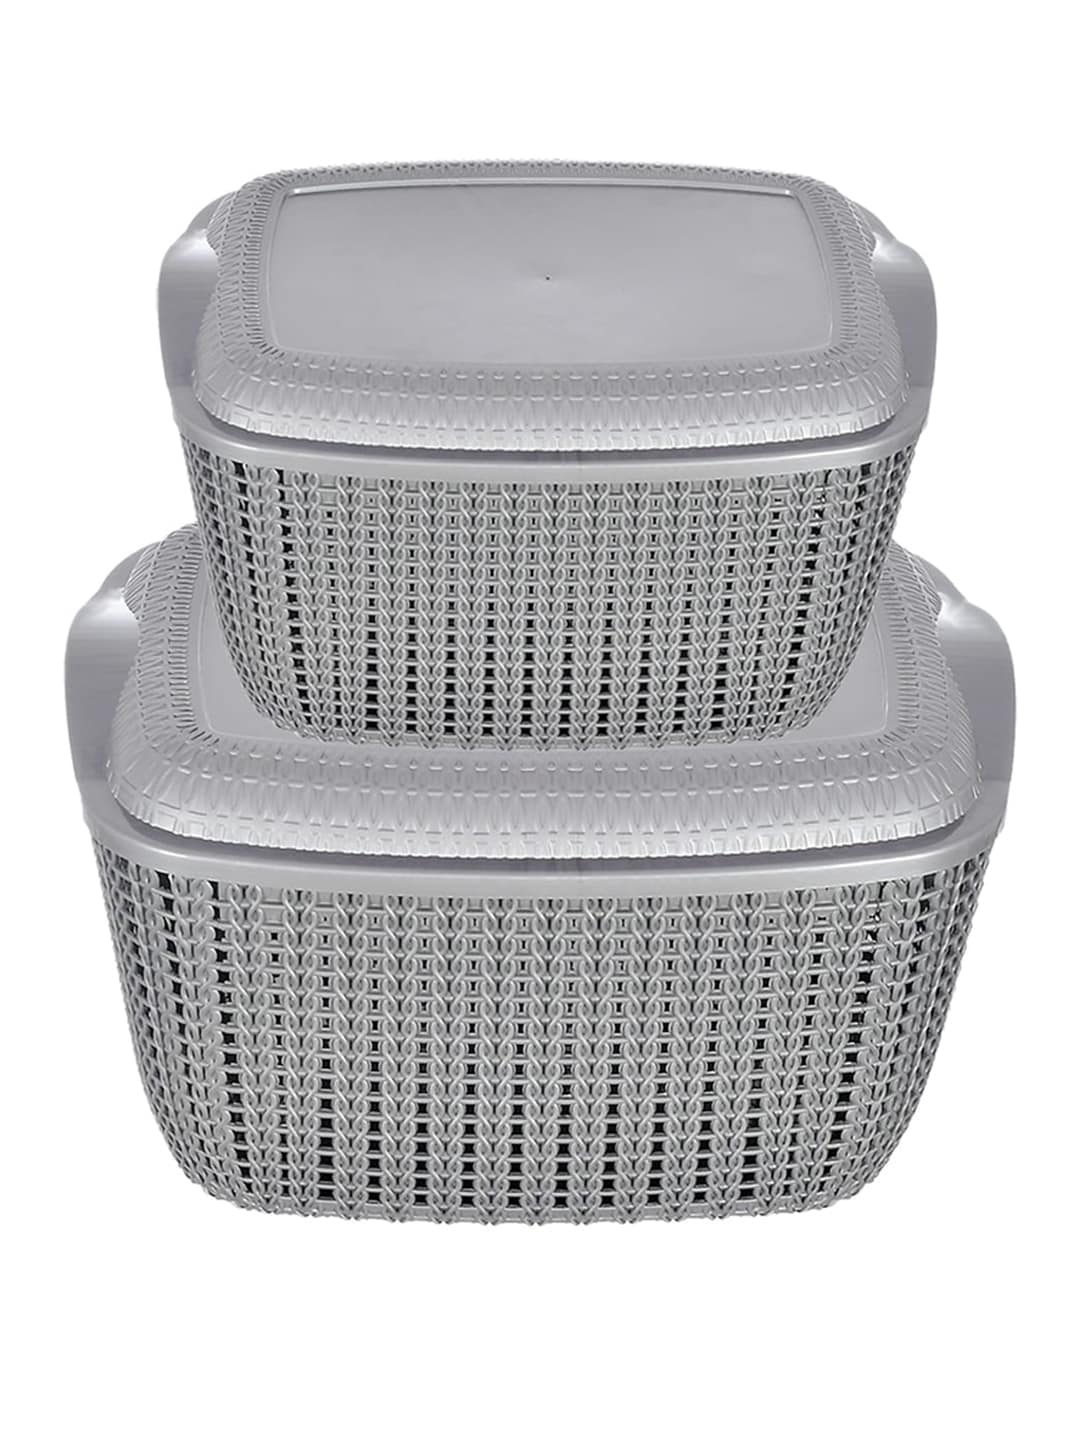 Kuber Industries Grey Set of 2 Plastic Basket With Lid Price in India